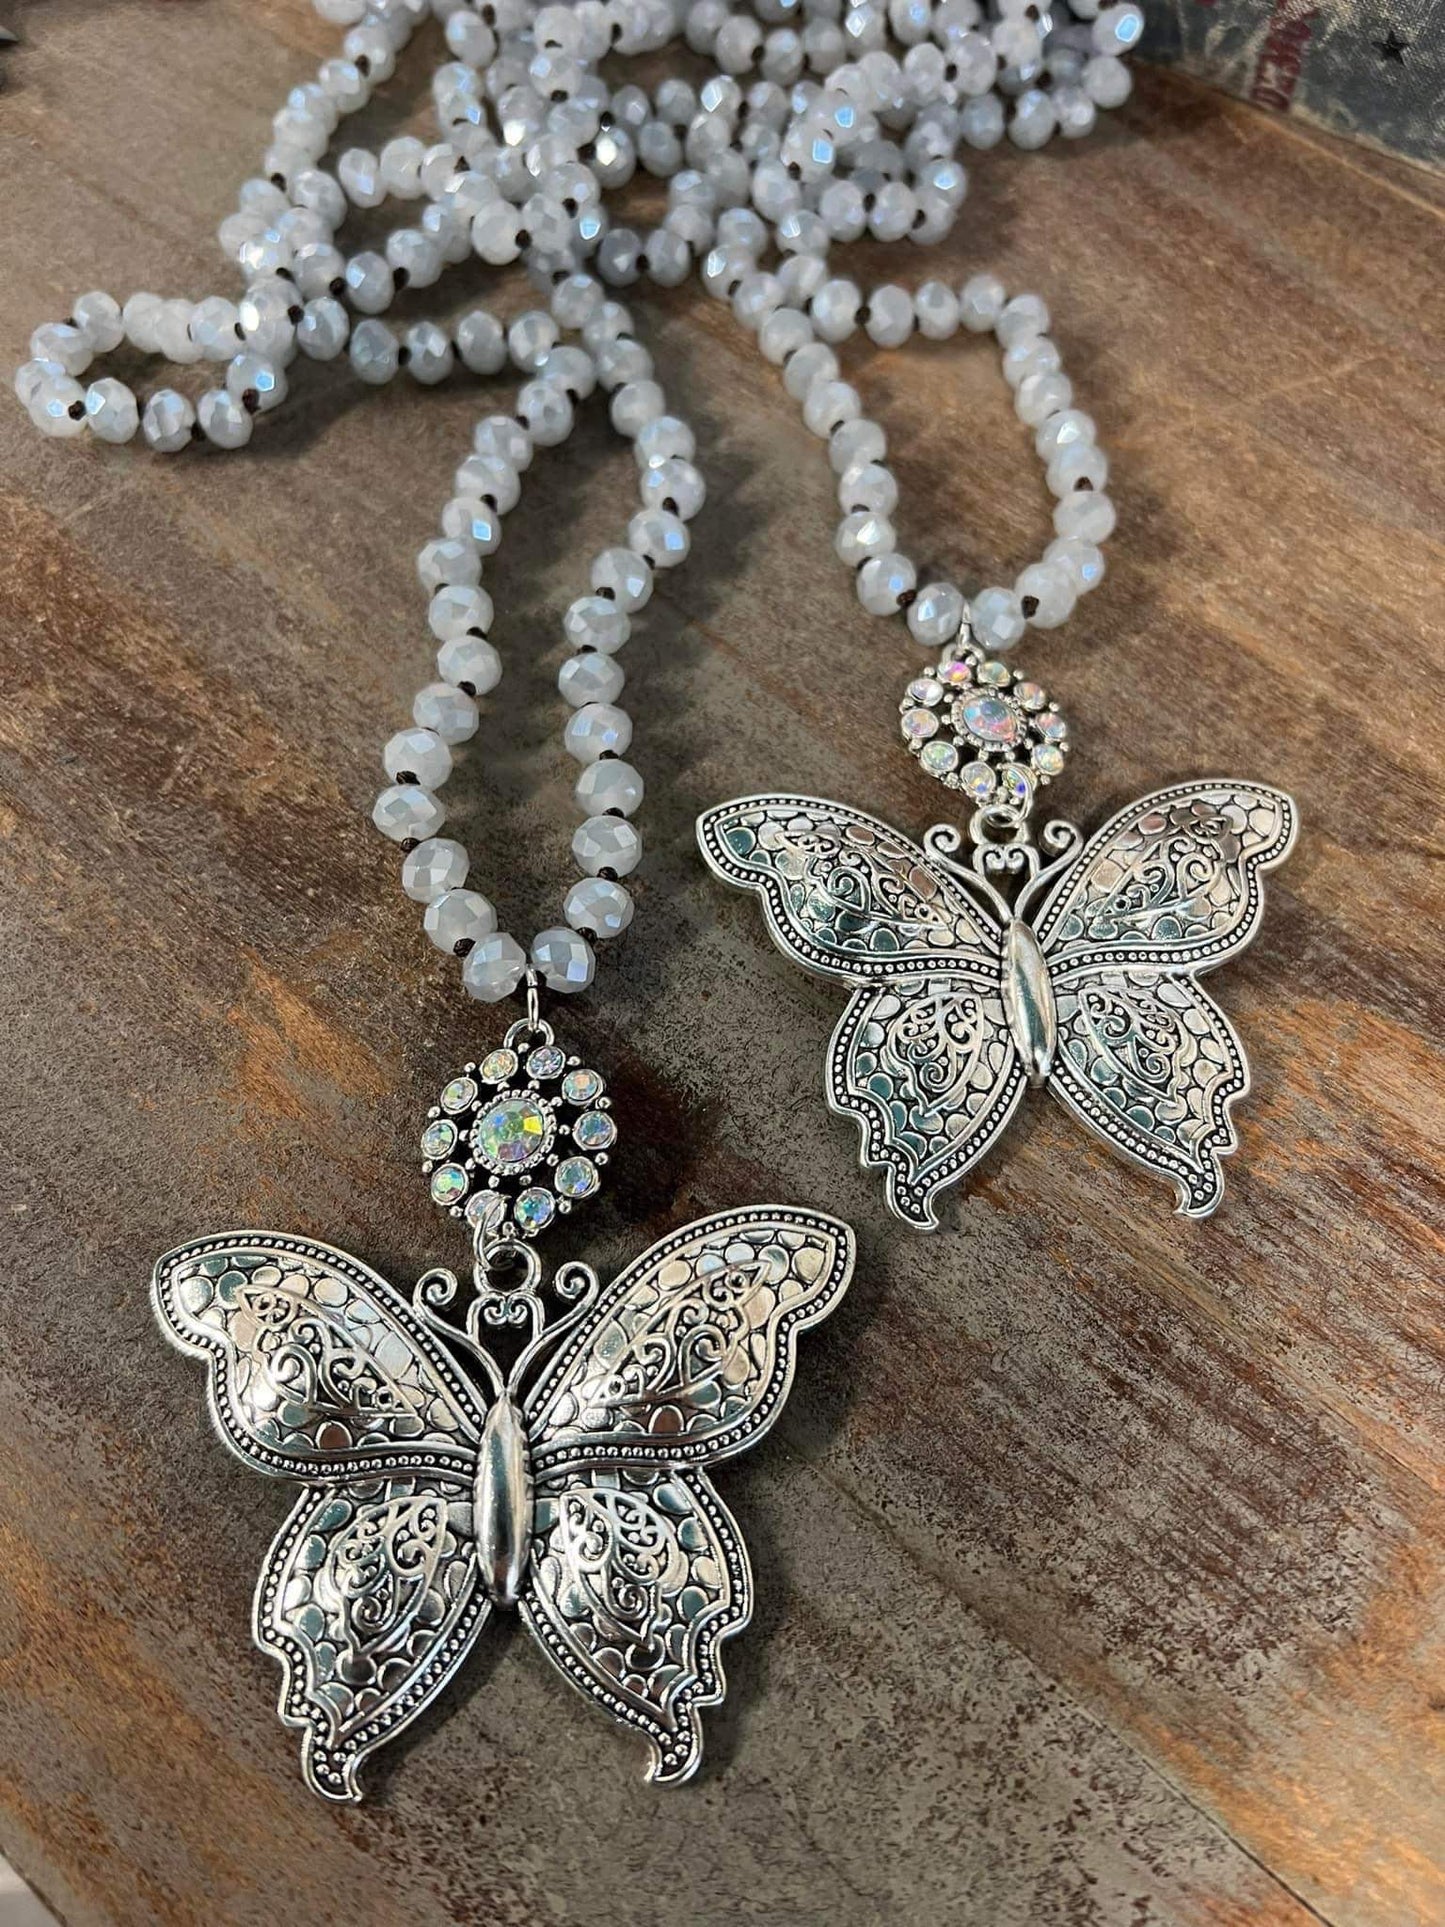 Beaded butterfly necklaces